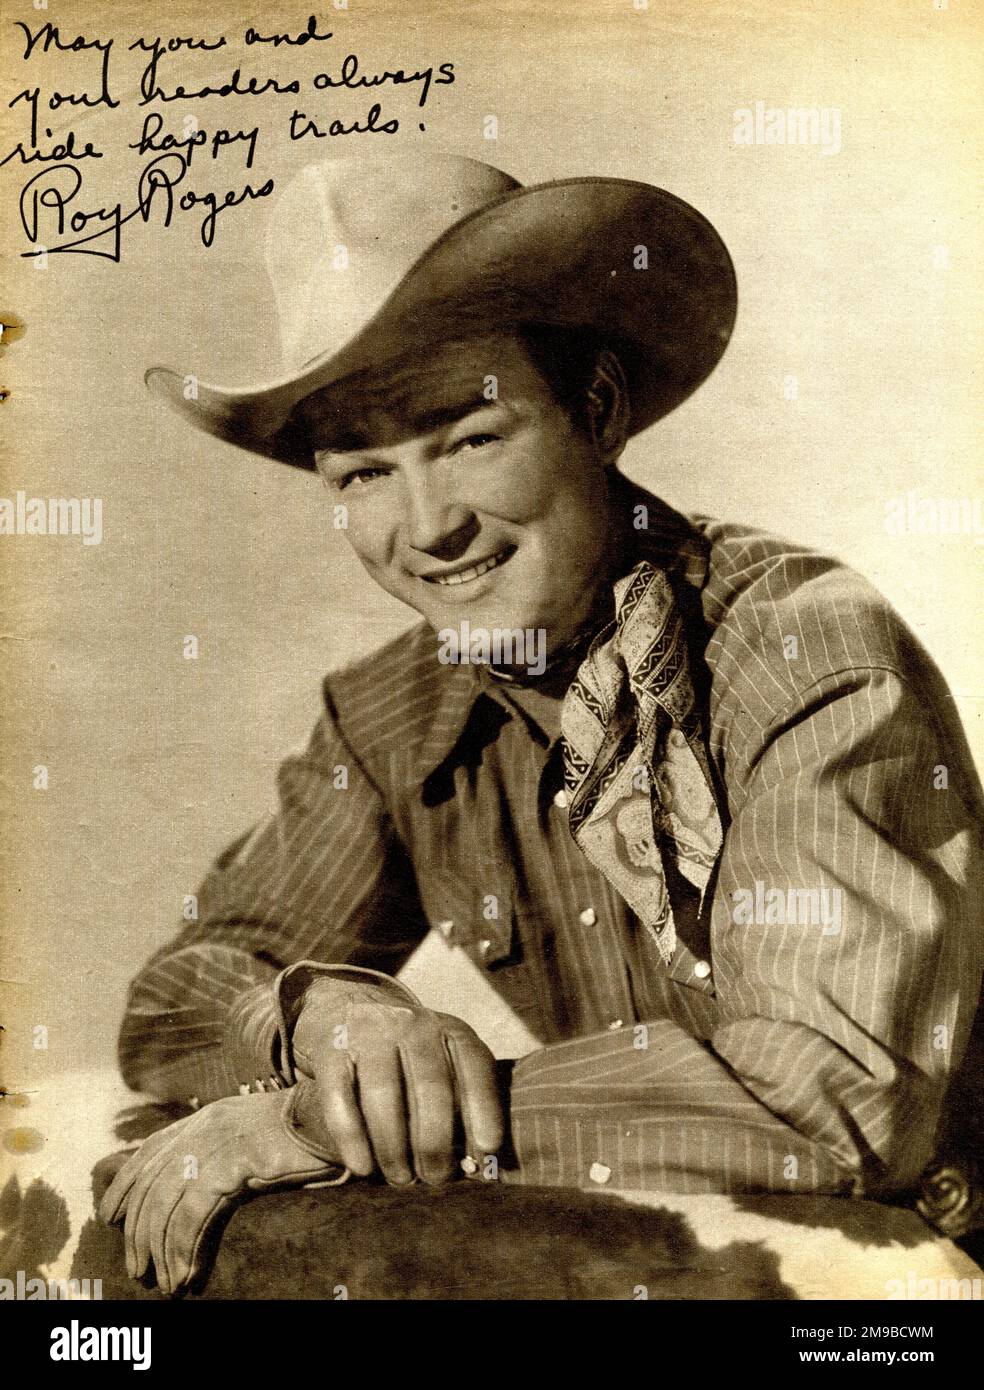 Roy Rogers, American actor and singer Stock Photo